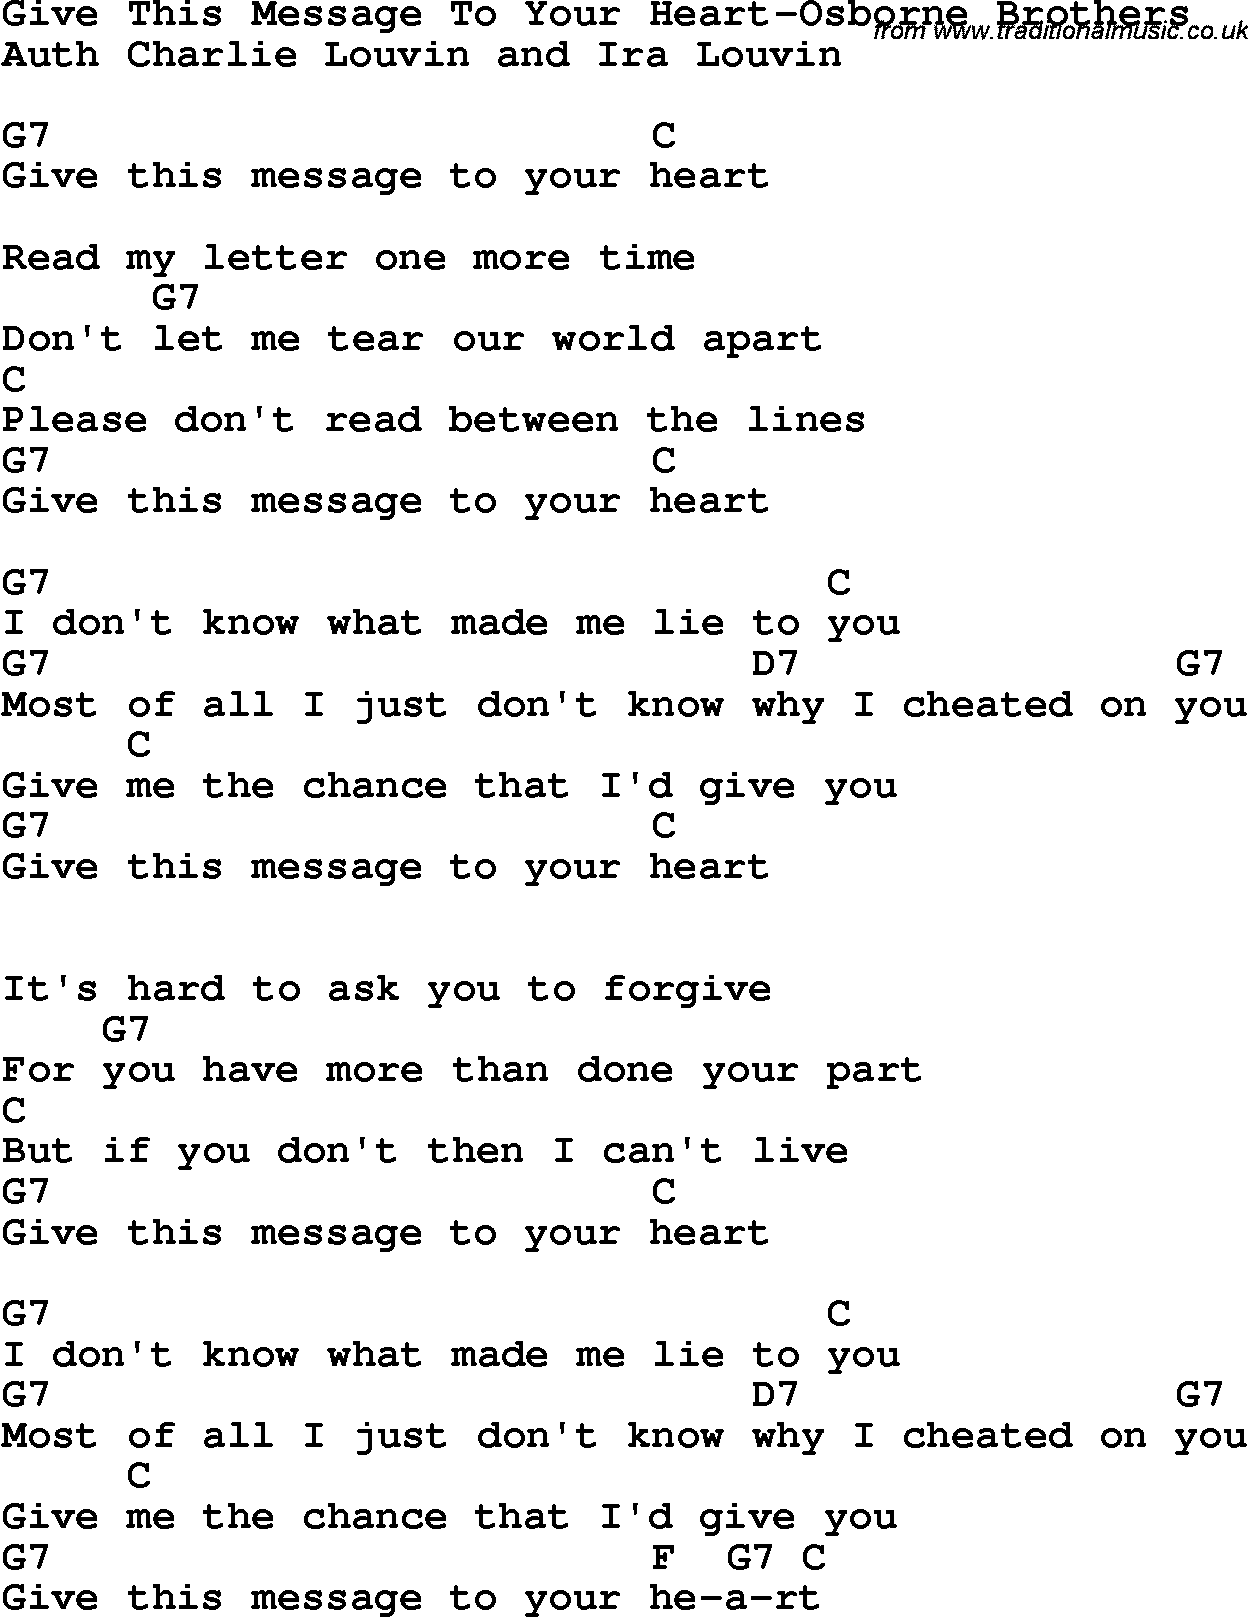 Country, Southern and Bluegrass Gospel Song Give This Message To Your Heart-Osborne Brothers lyrics and chords